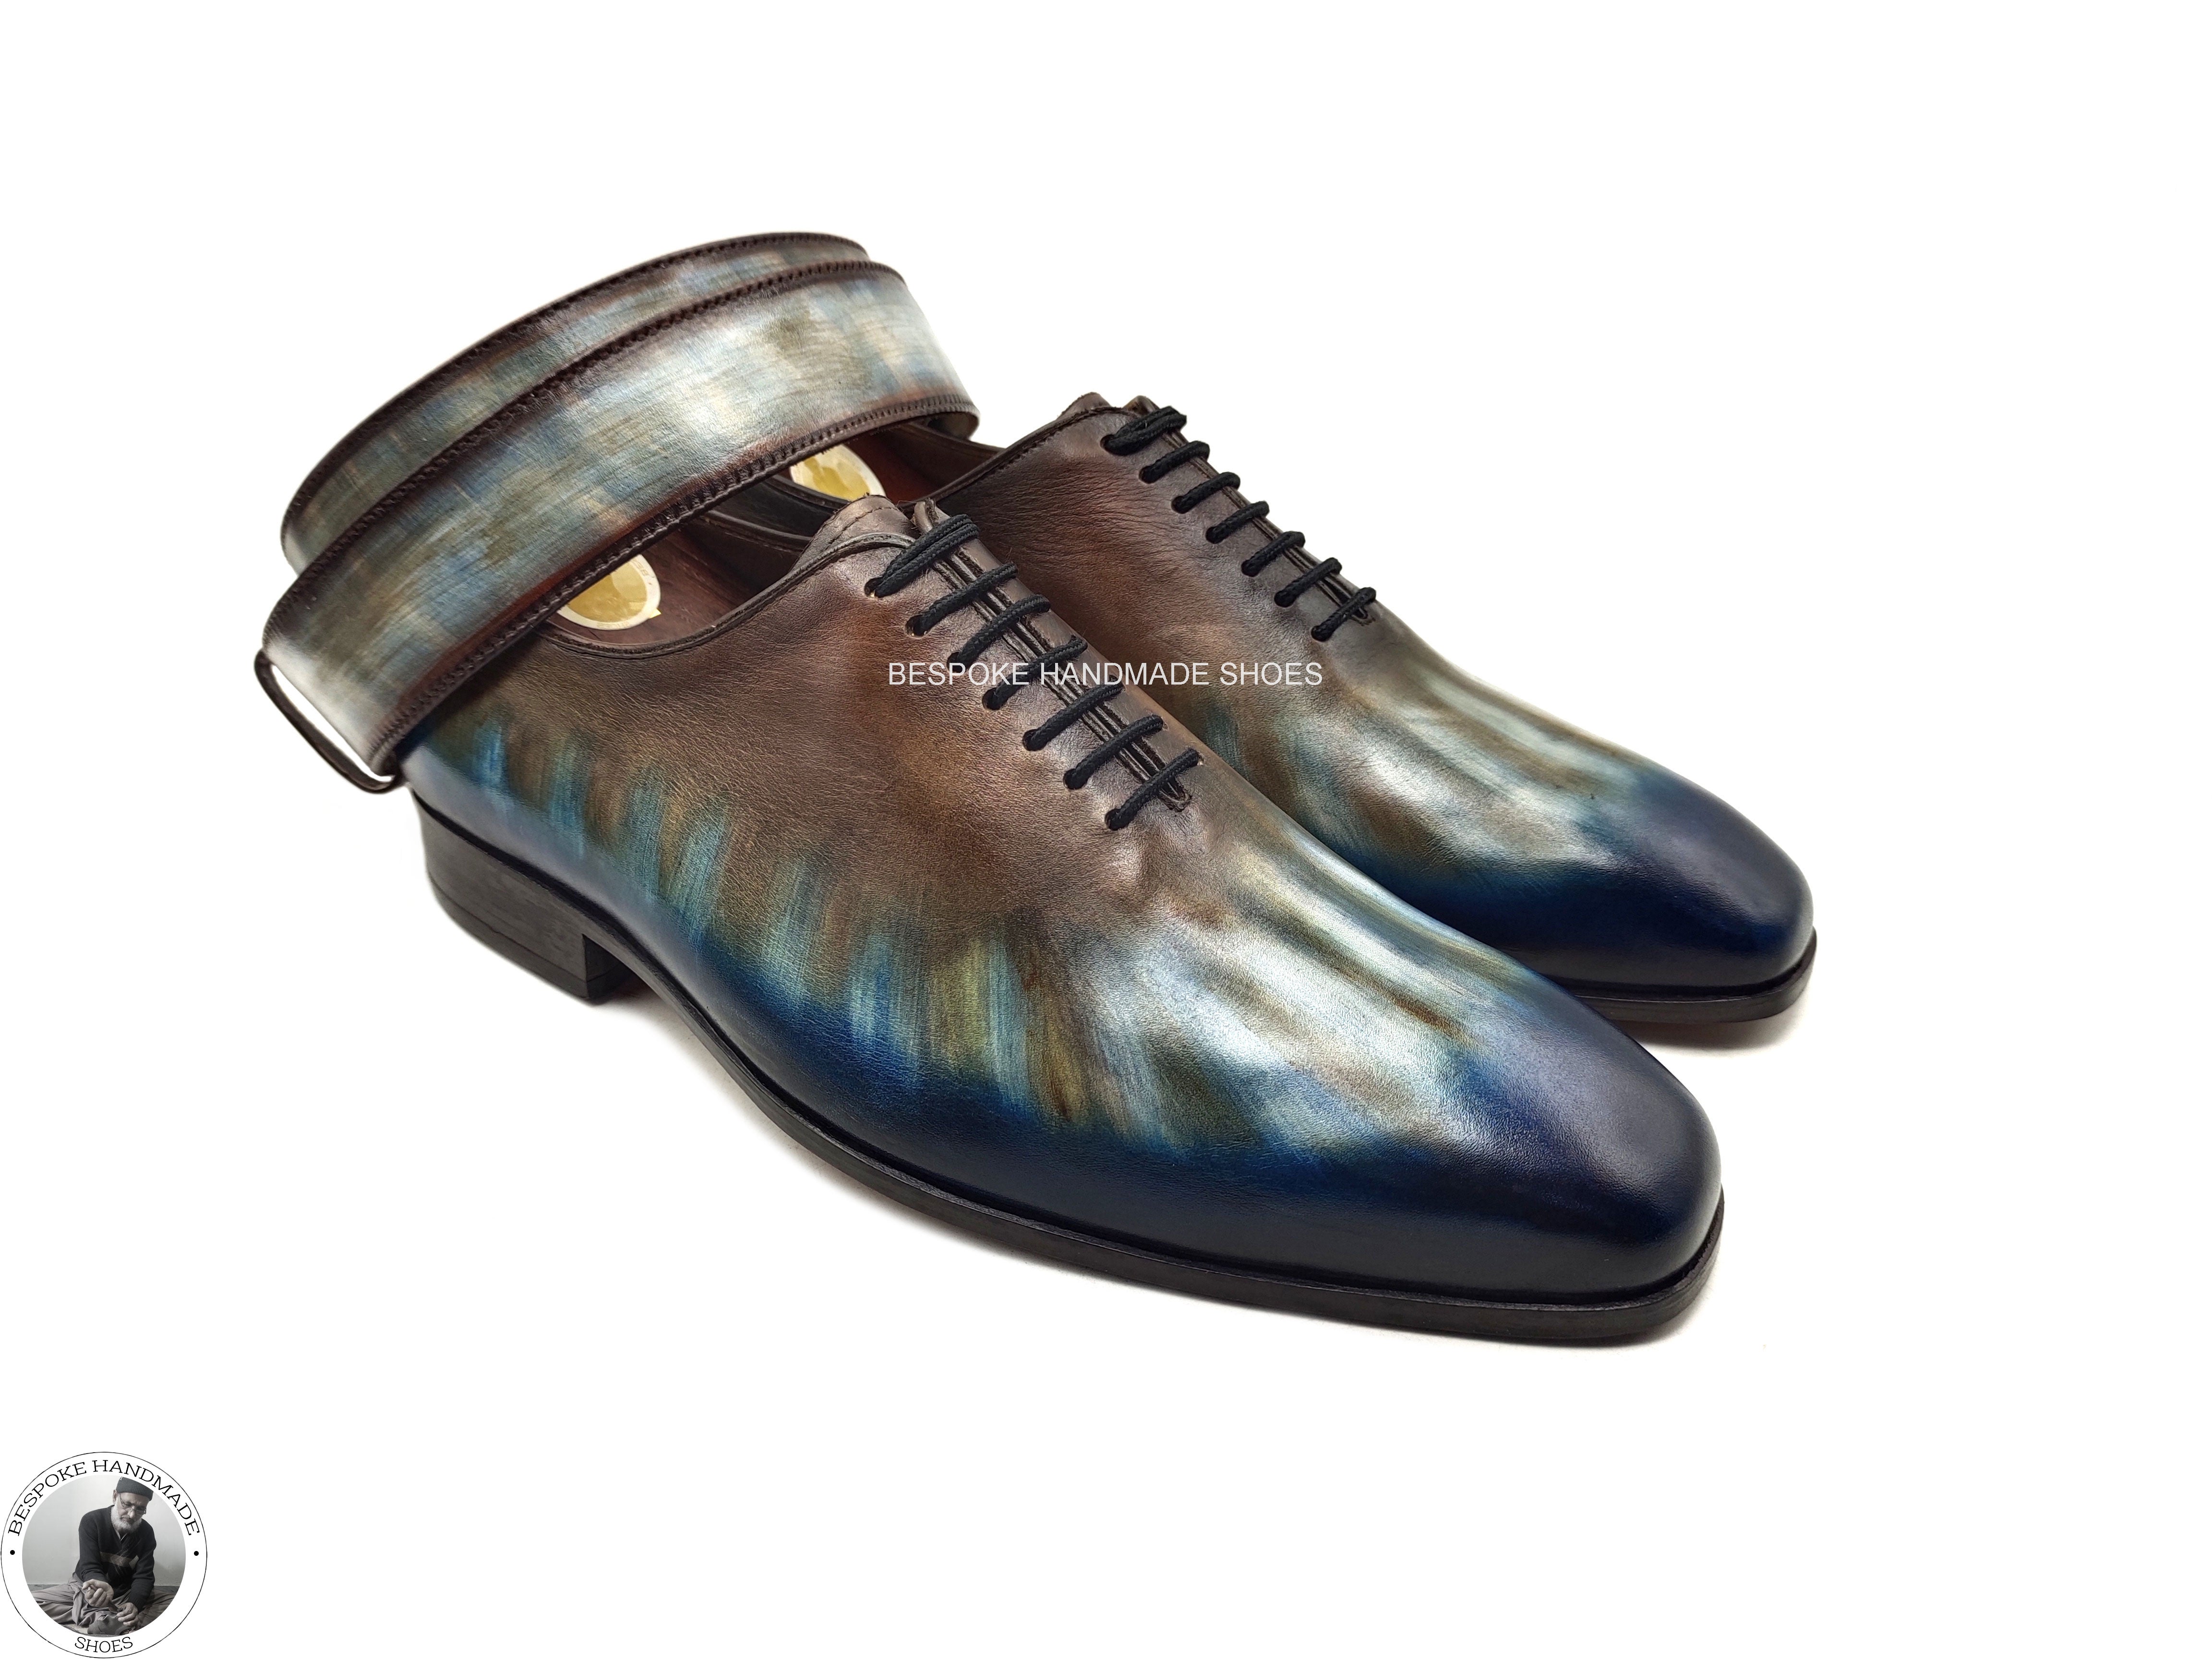 Bespoke Handmade Men Two Tone Calf Leather Patina art Hand Painted Wholecut Oxford Lace up Formal Shoe